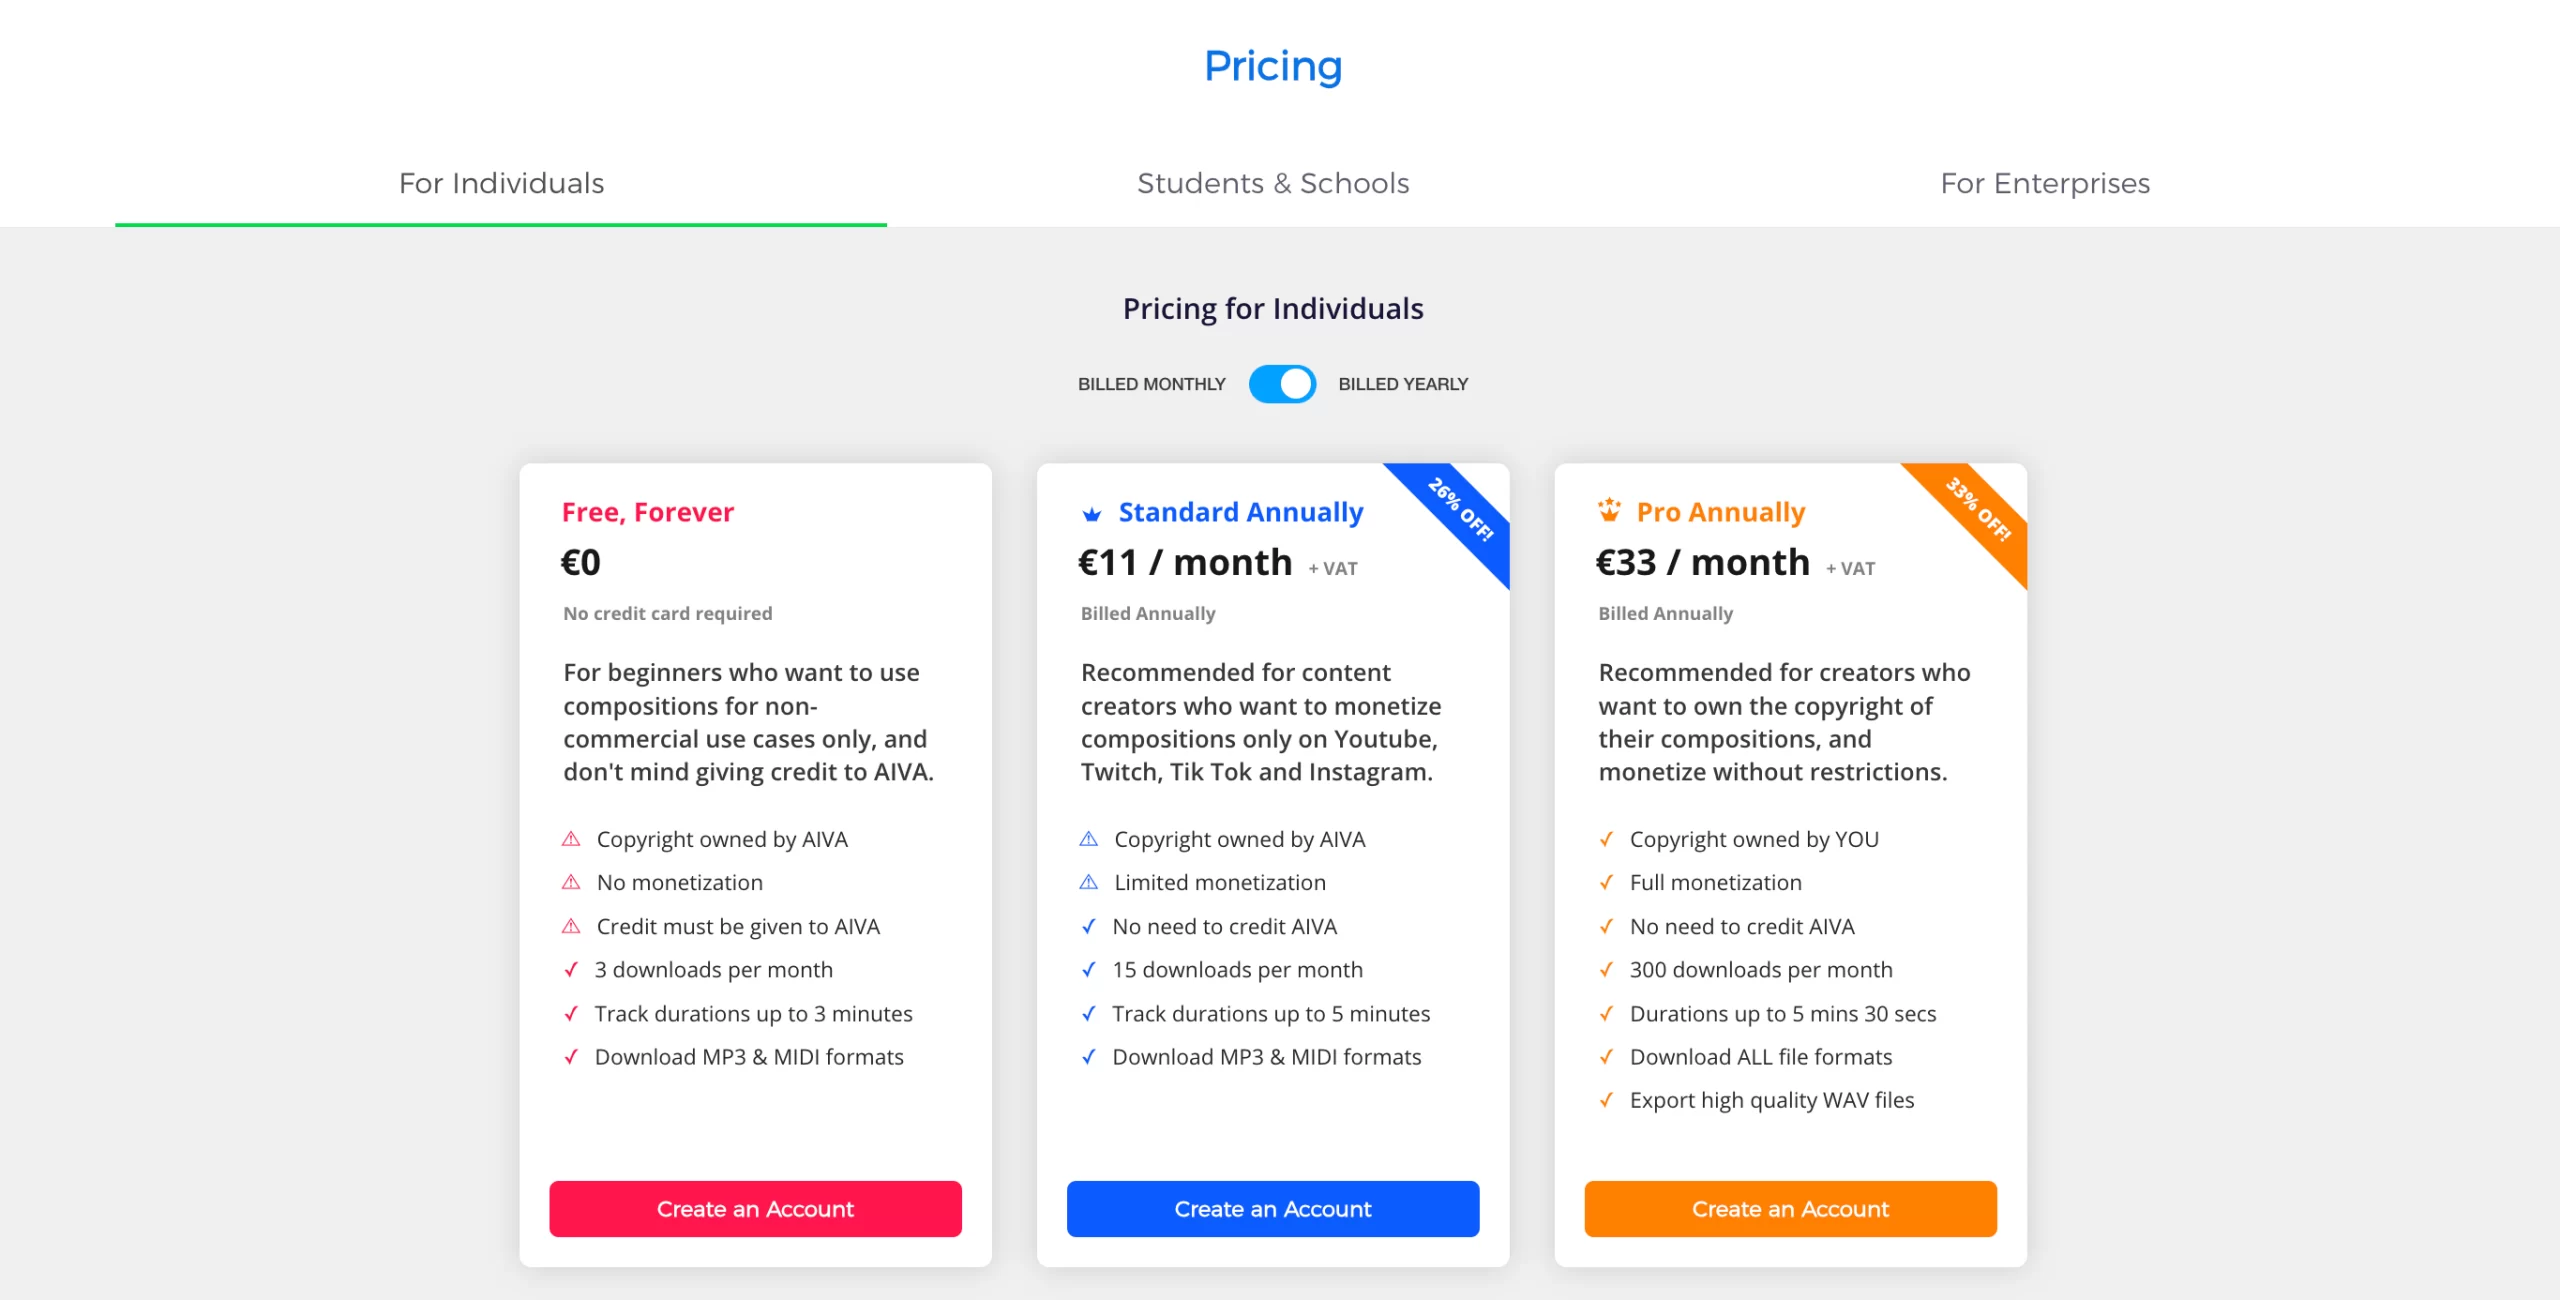 AIVA's pricing options from their website